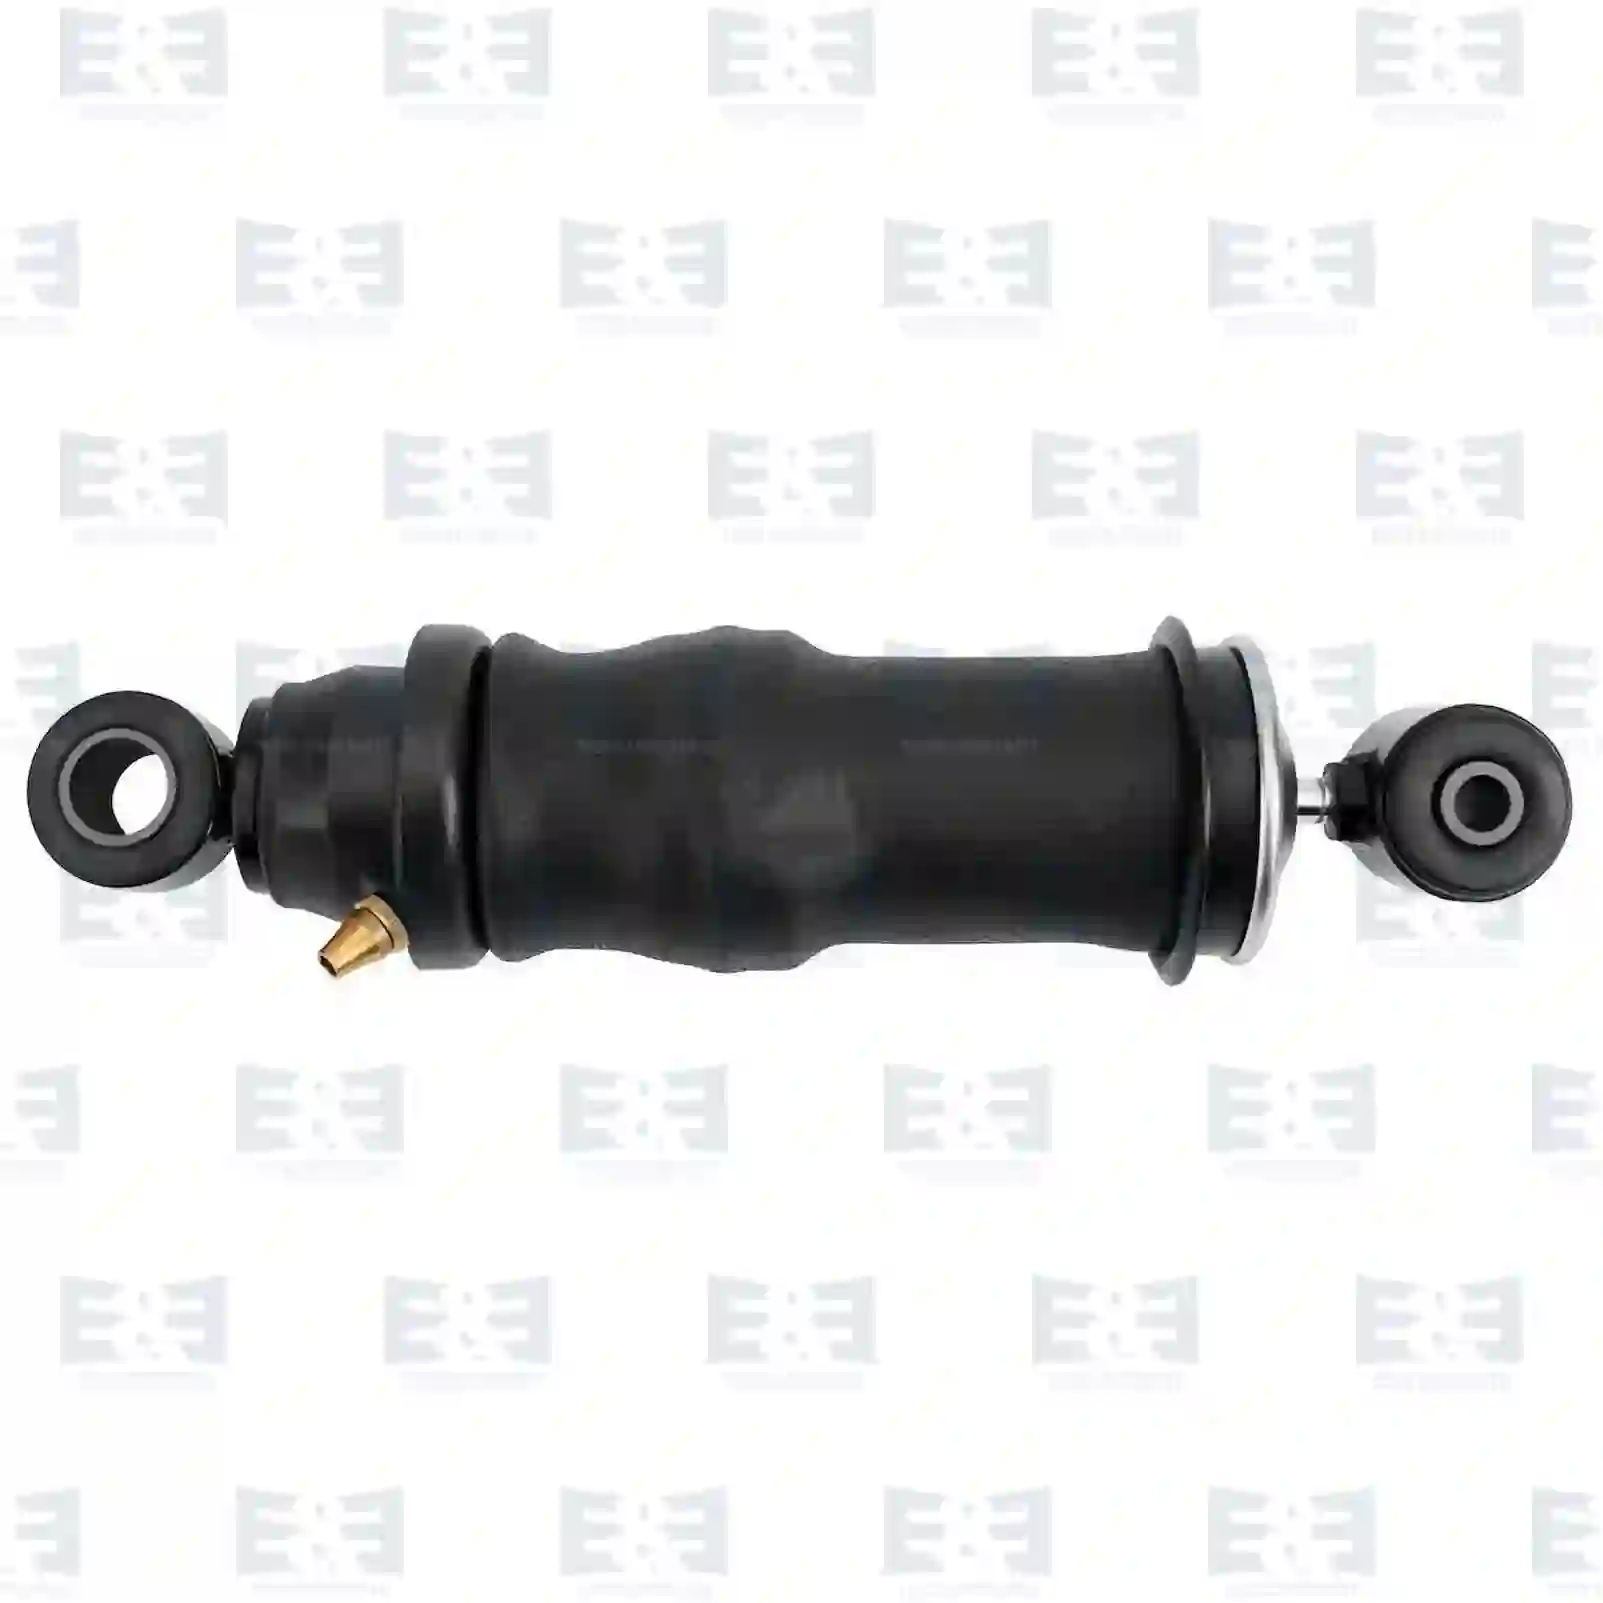 Cabin shock absorber, with air bellow, 2E2276248, 9428905319, 9428905919, , , ||  2E2276248 E&E Truck Spare Parts | Truck Spare Parts, Auotomotive Spare Parts Cabin shock absorber, with air bellow, 2E2276248, 9428905319, 9428905919, , , ||  2E2276248 E&E Truck Spare Parts | Truck Spare Parts, Auotomotive Spare Parts